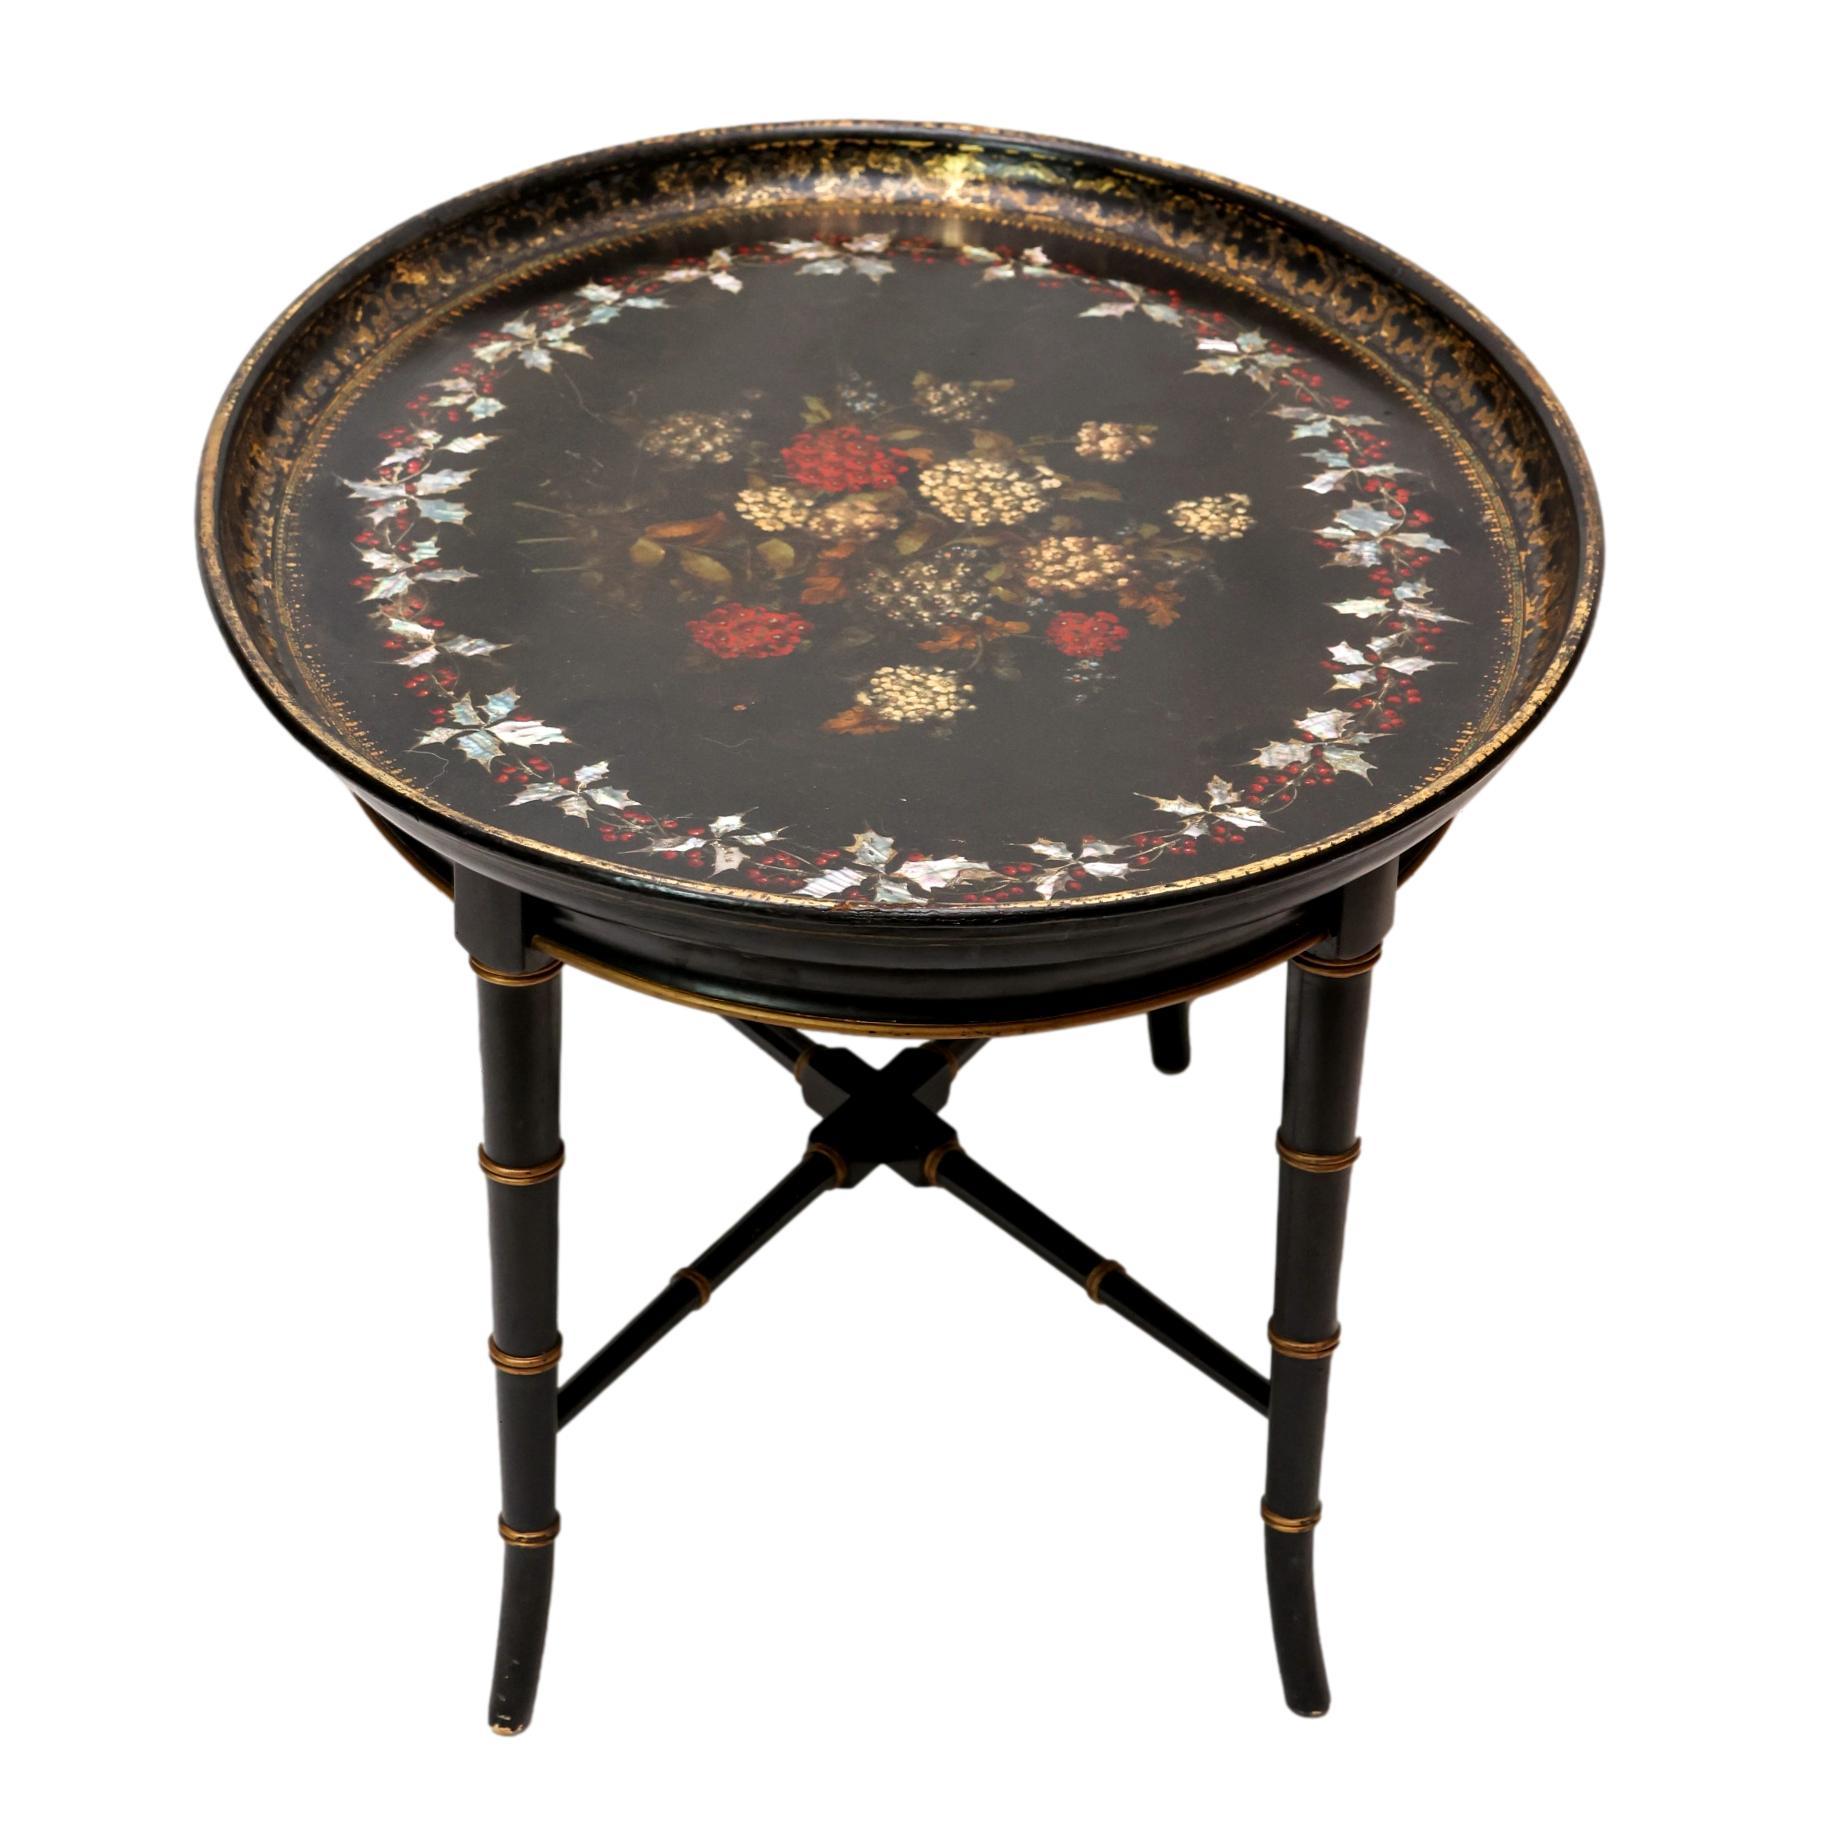 Mother-of-Pearl Inlaid and Ebonized Paper Mache Tray Table, English, ca. 1850 For Sale 2